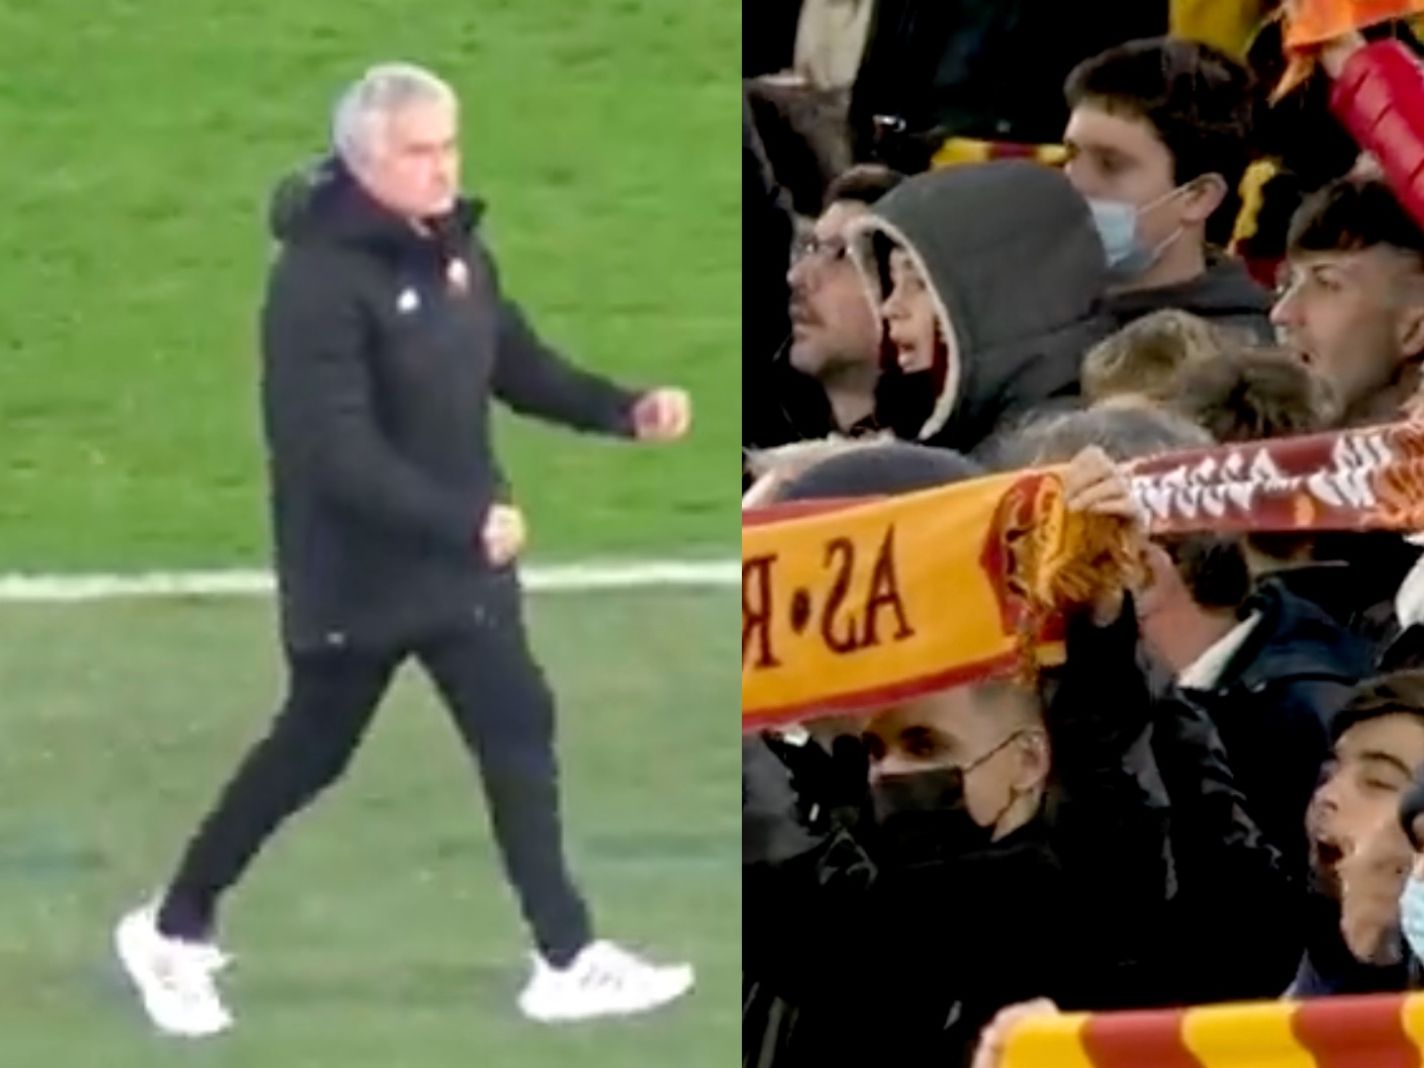 AS Roma fans in full voice at kick-off as Jose Mourinho matches their passion after full-time